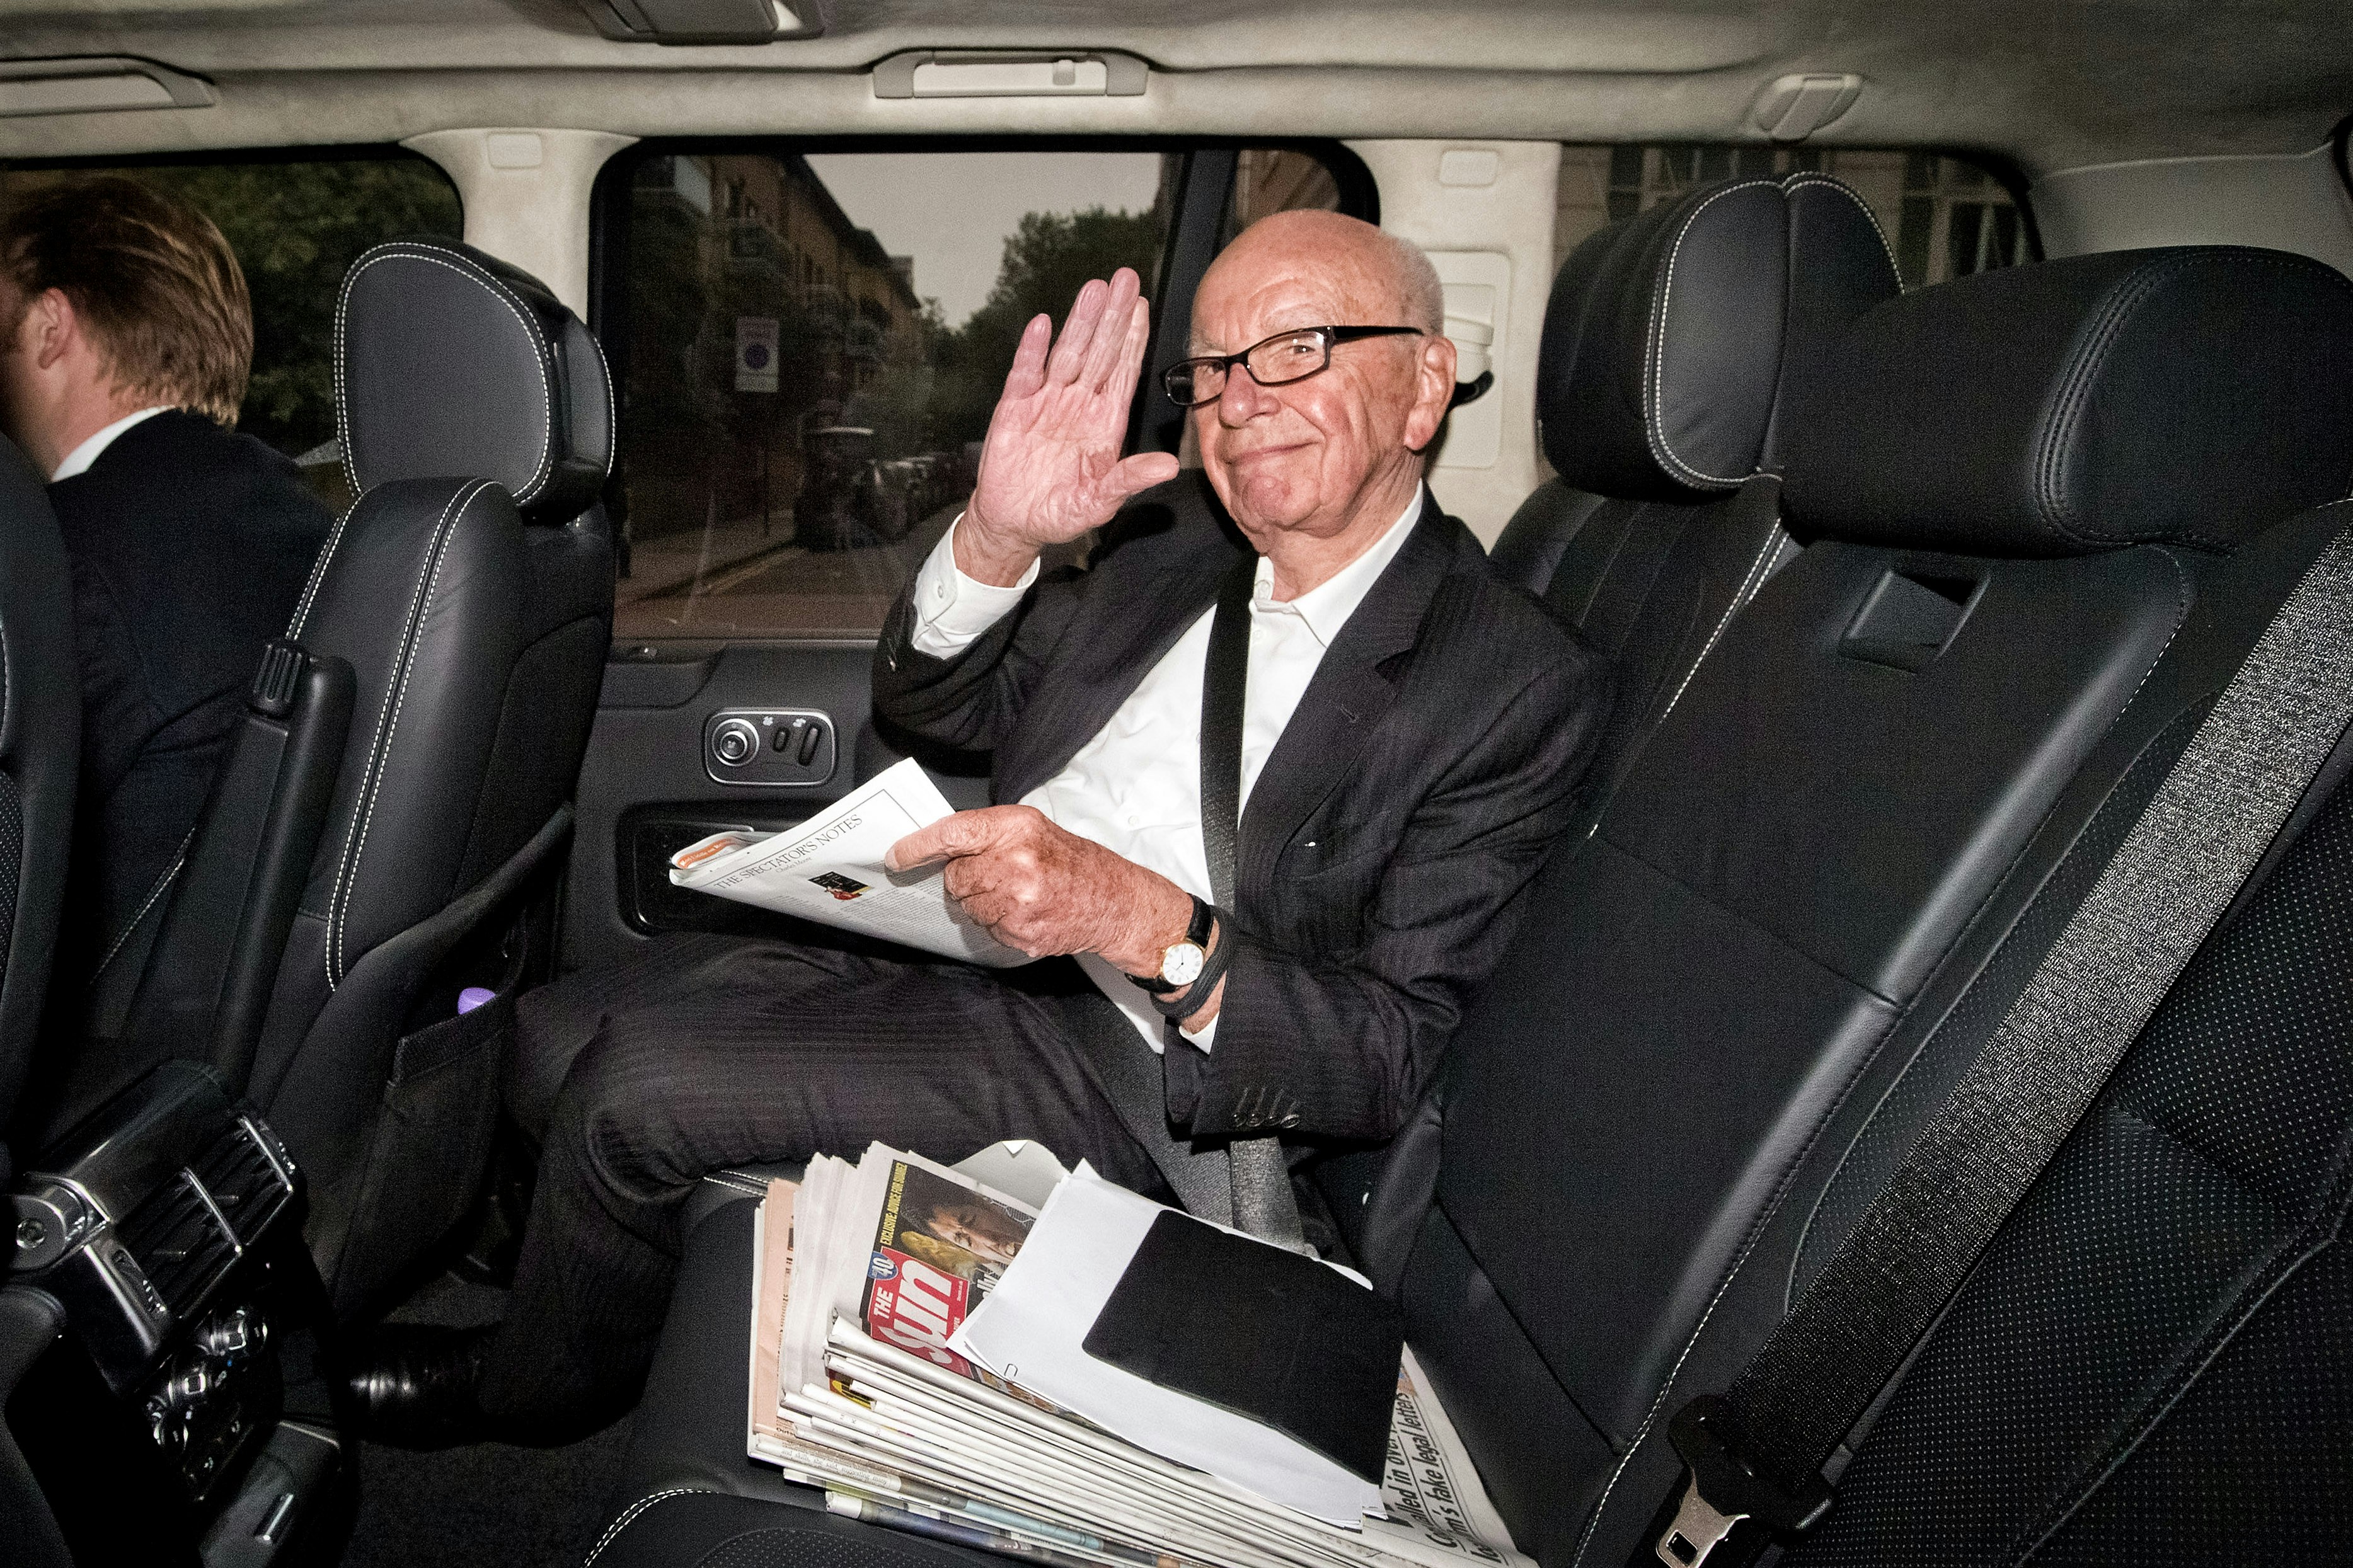 Media Mogul Rupert Murdoch waves to photographers as he is driven away from News UK headquarters in London, on June 26, 2014.  News Corporation executive chairman Rupert Murdoch was in London, where he visited the headquarters of News UK,  after the high-profile trial concluded with the acquittal of his protege Rebekah Brooks and the conviction of Andy Coulson, one of his former British newspaper editors. AFP PHOTO / JUSTIN TALLIS        (Photo credit should read JUSTIN TALLIS/AFP via Getty Images)